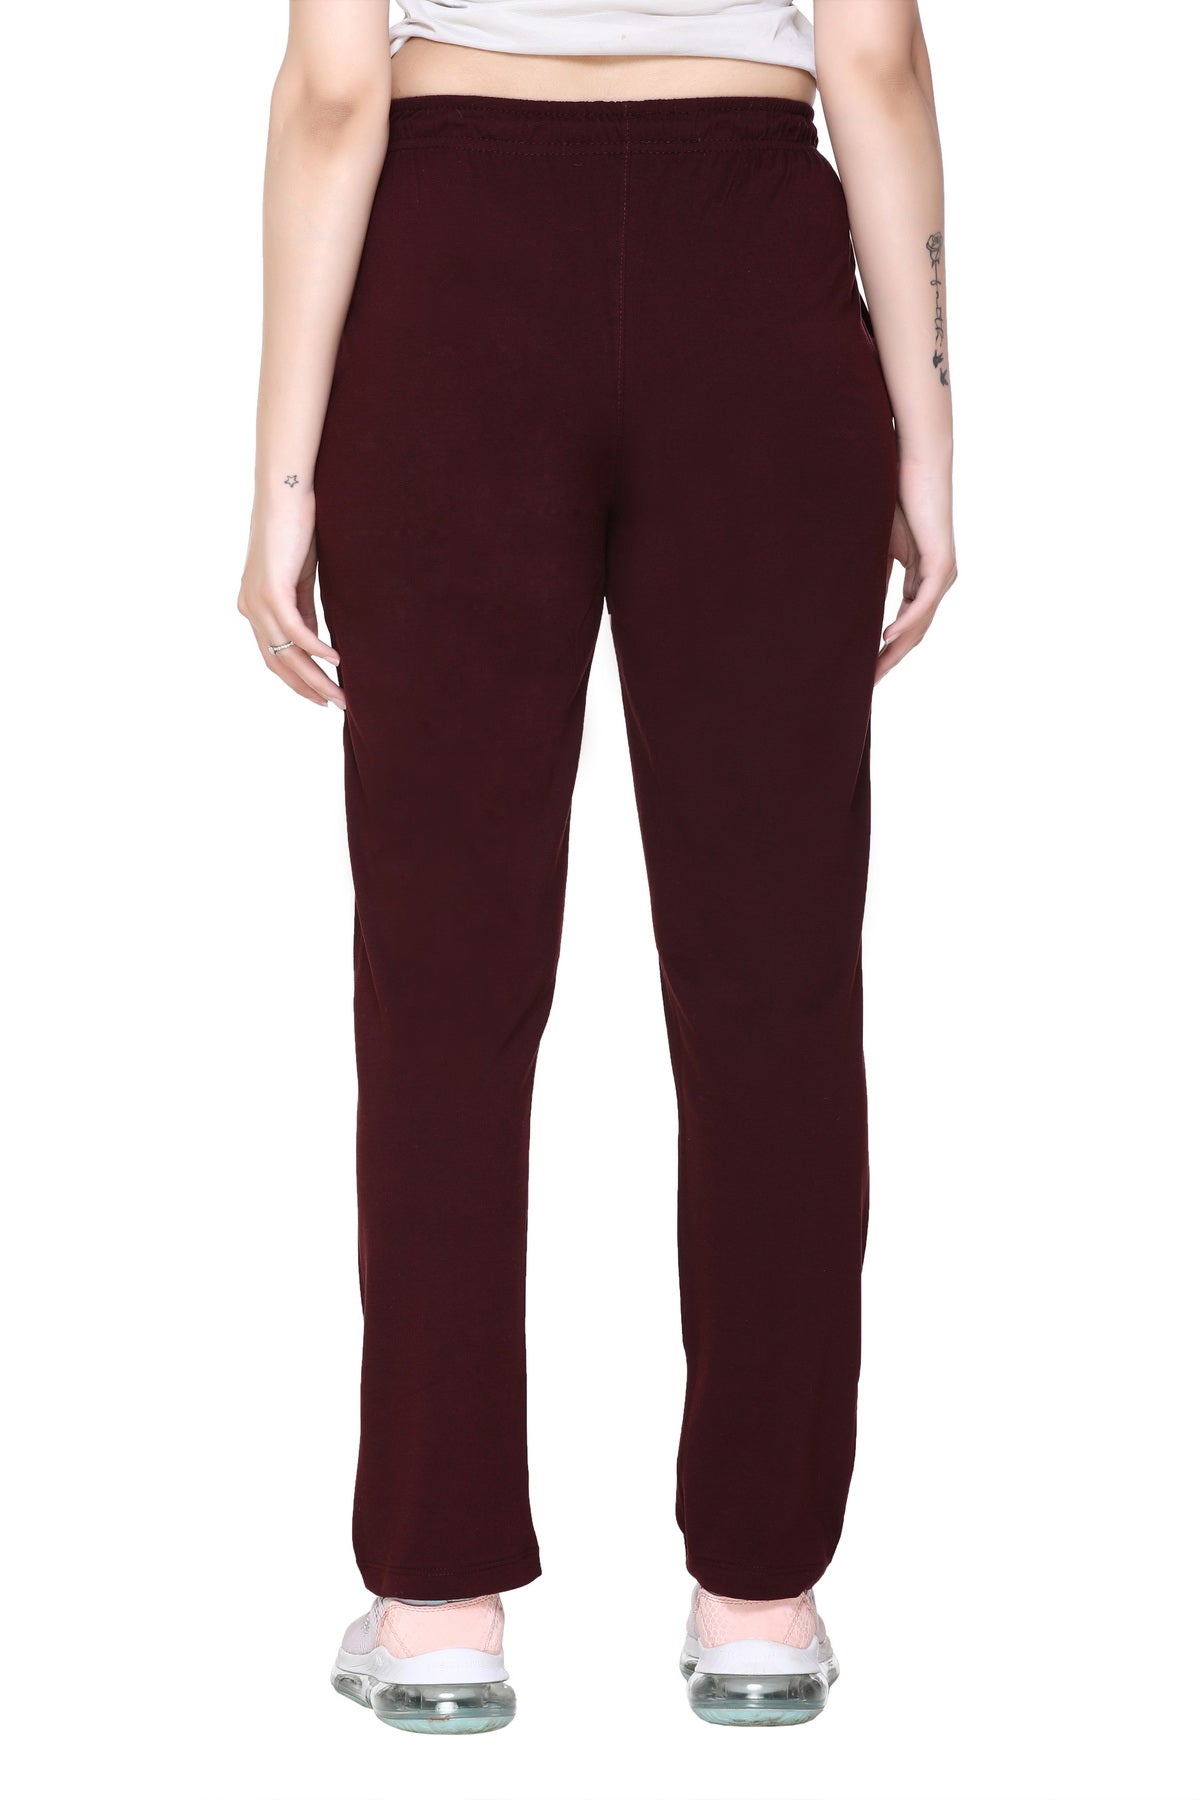 Stylish Cotton Track Pants For Women (Pack of 2) Online In India